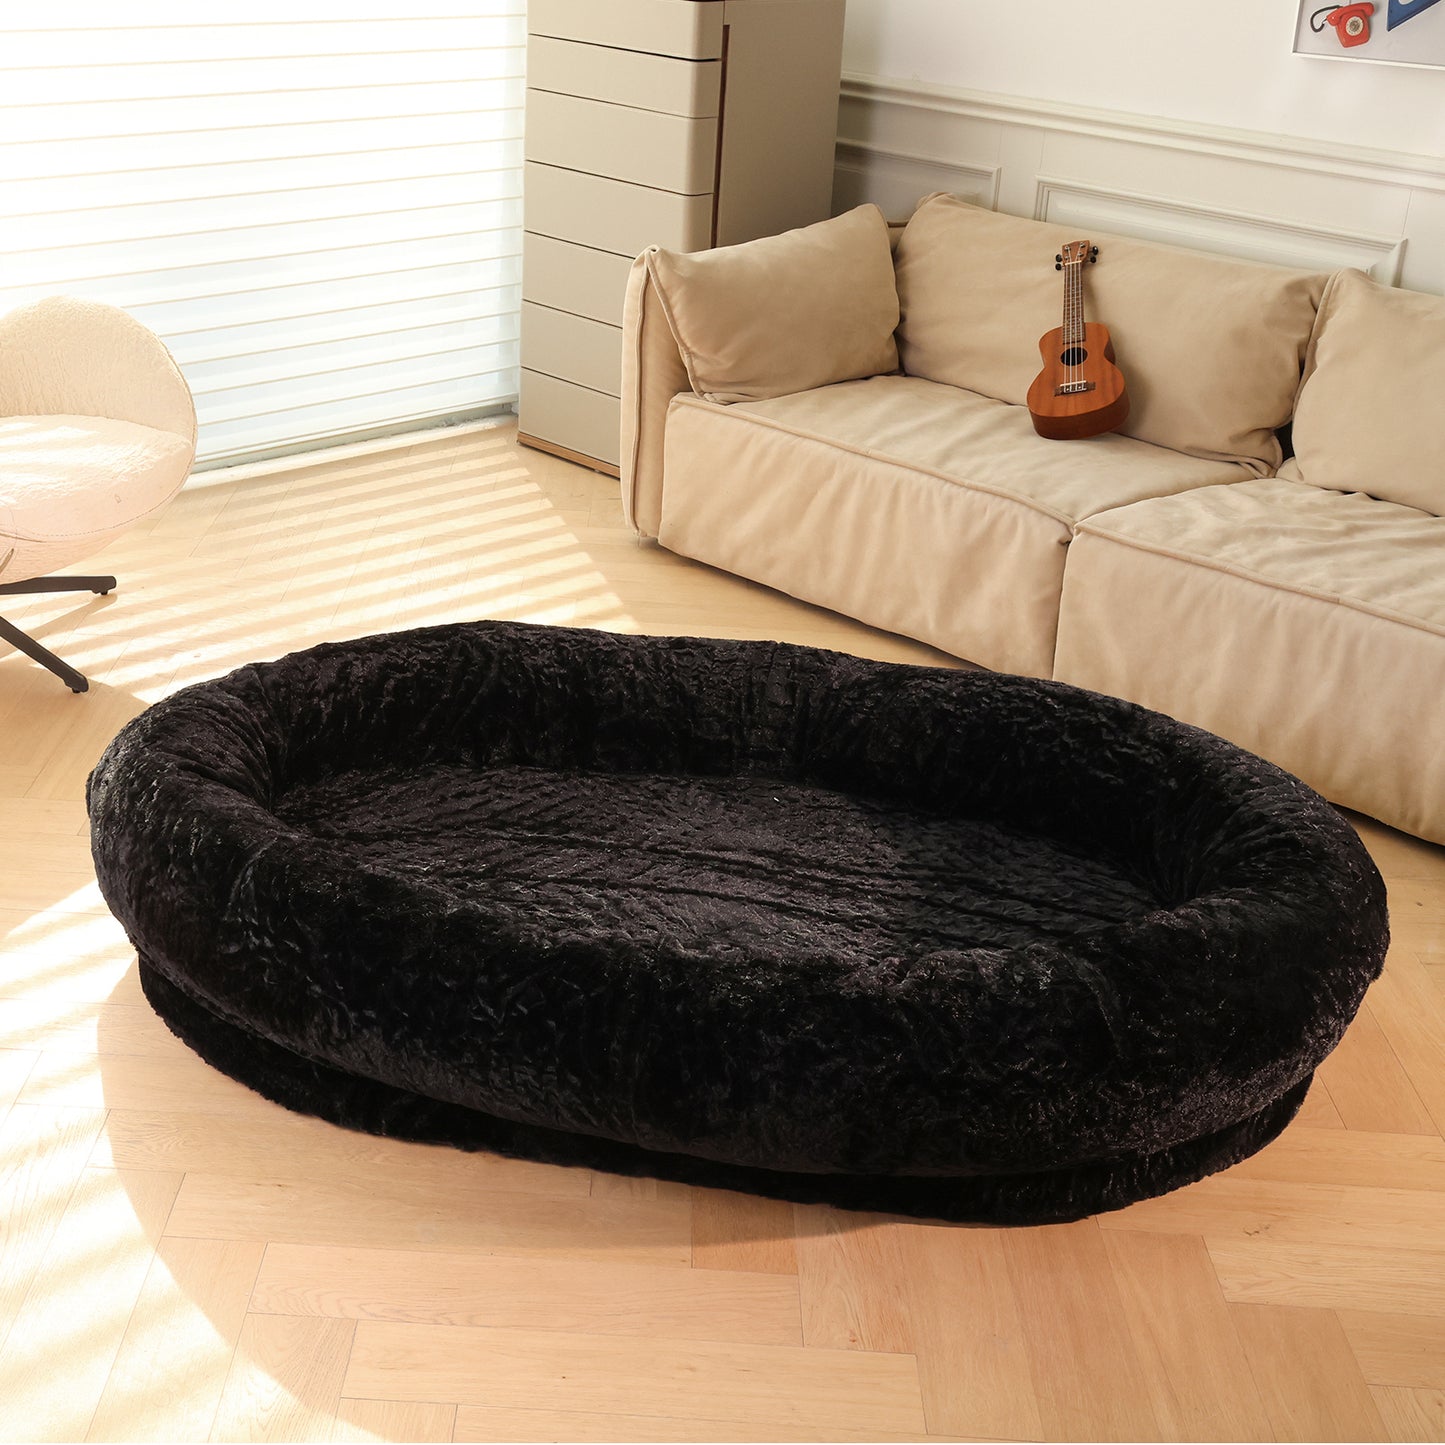 RYPetmia Extra Large Bed for Humans Bean Bag Human Sized Large Dog Bed with Blanket